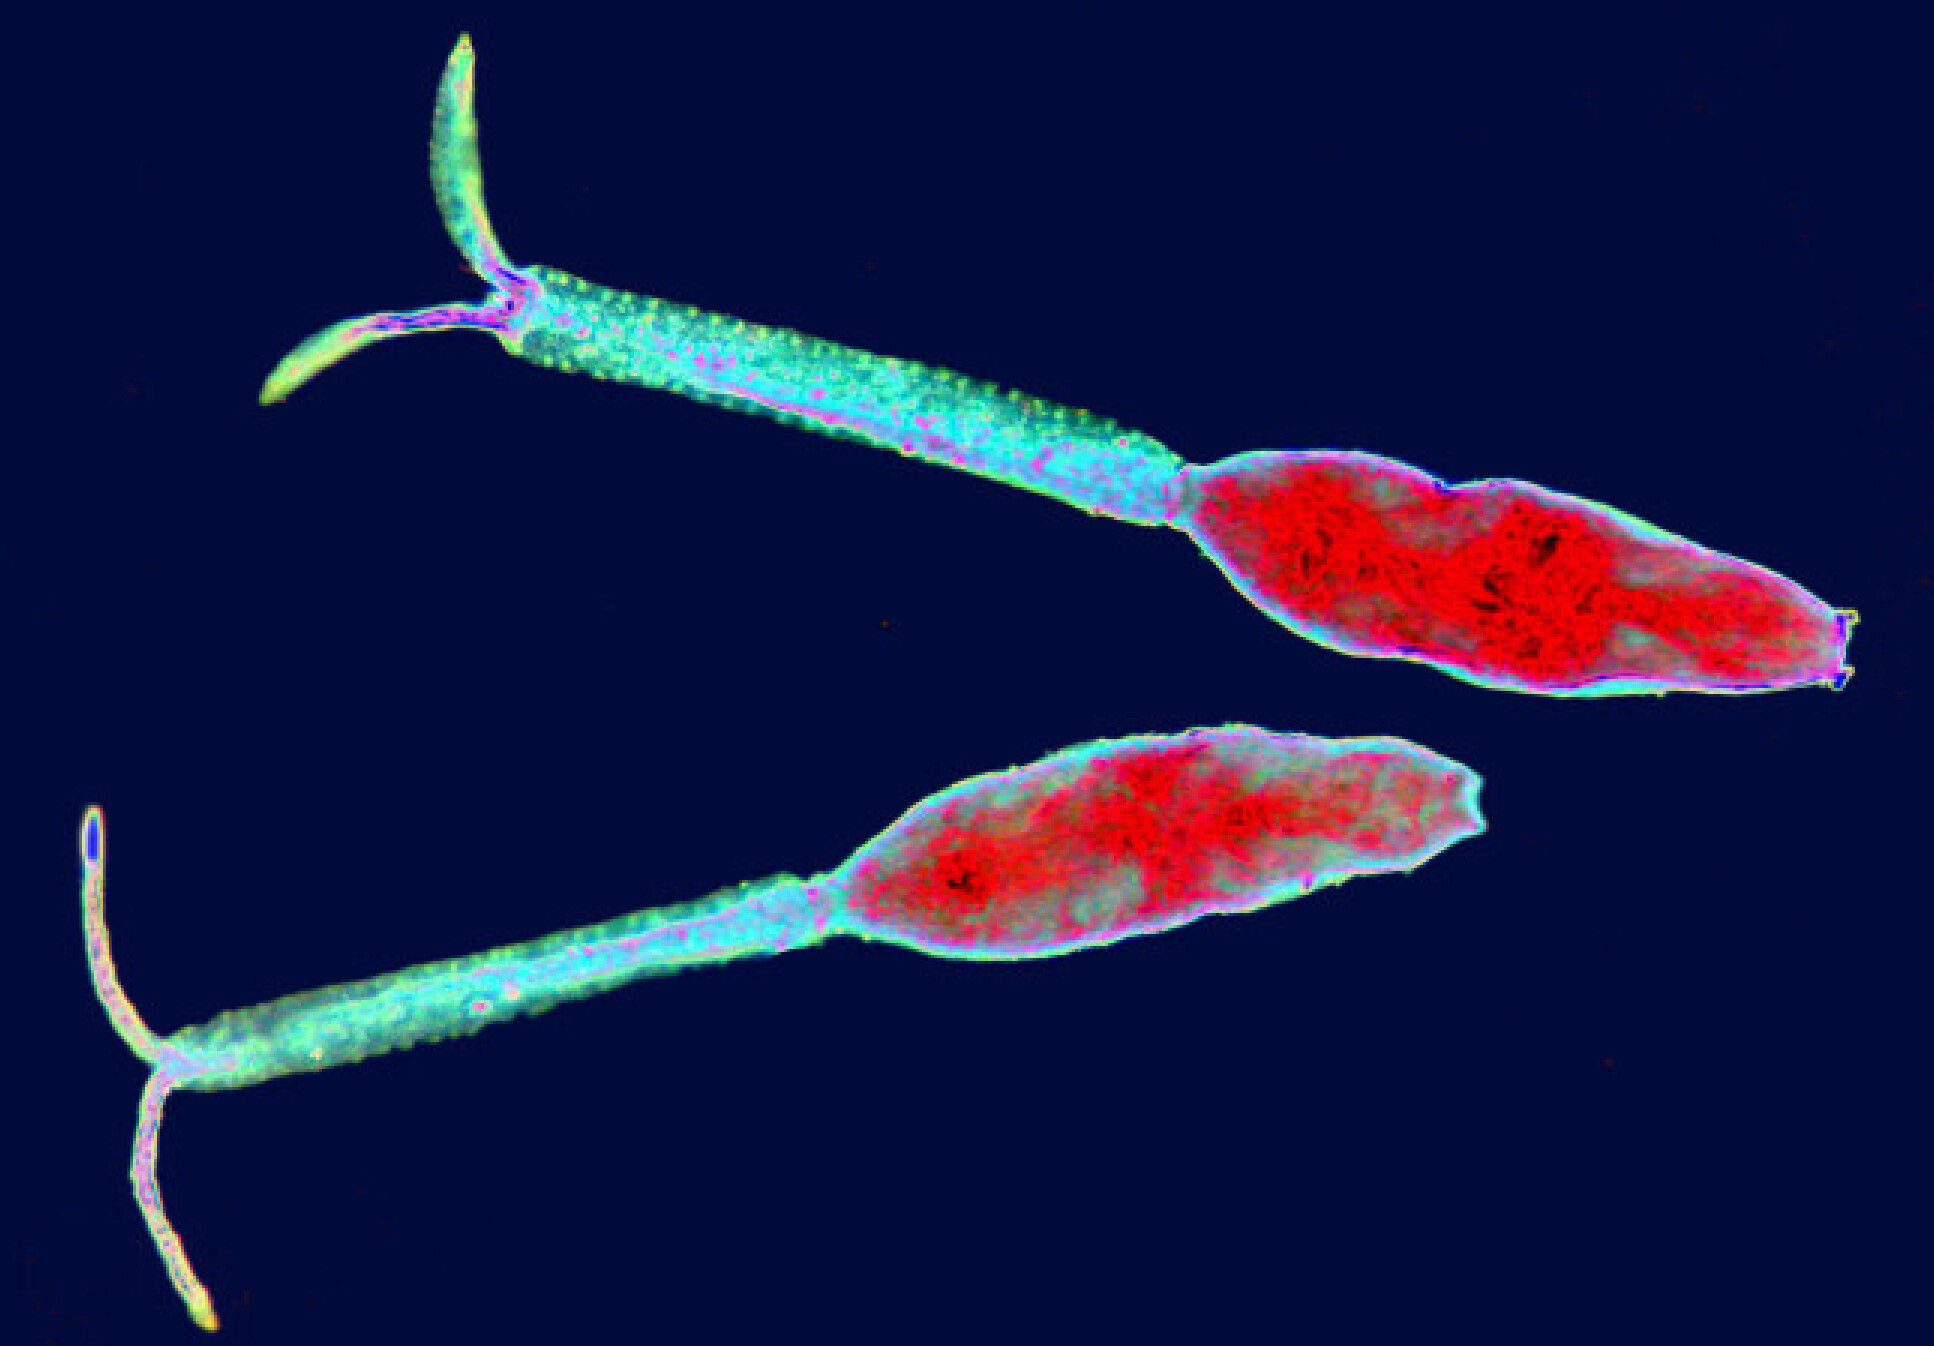 Larval forms of the parasitic worms that cause schistosomiasis